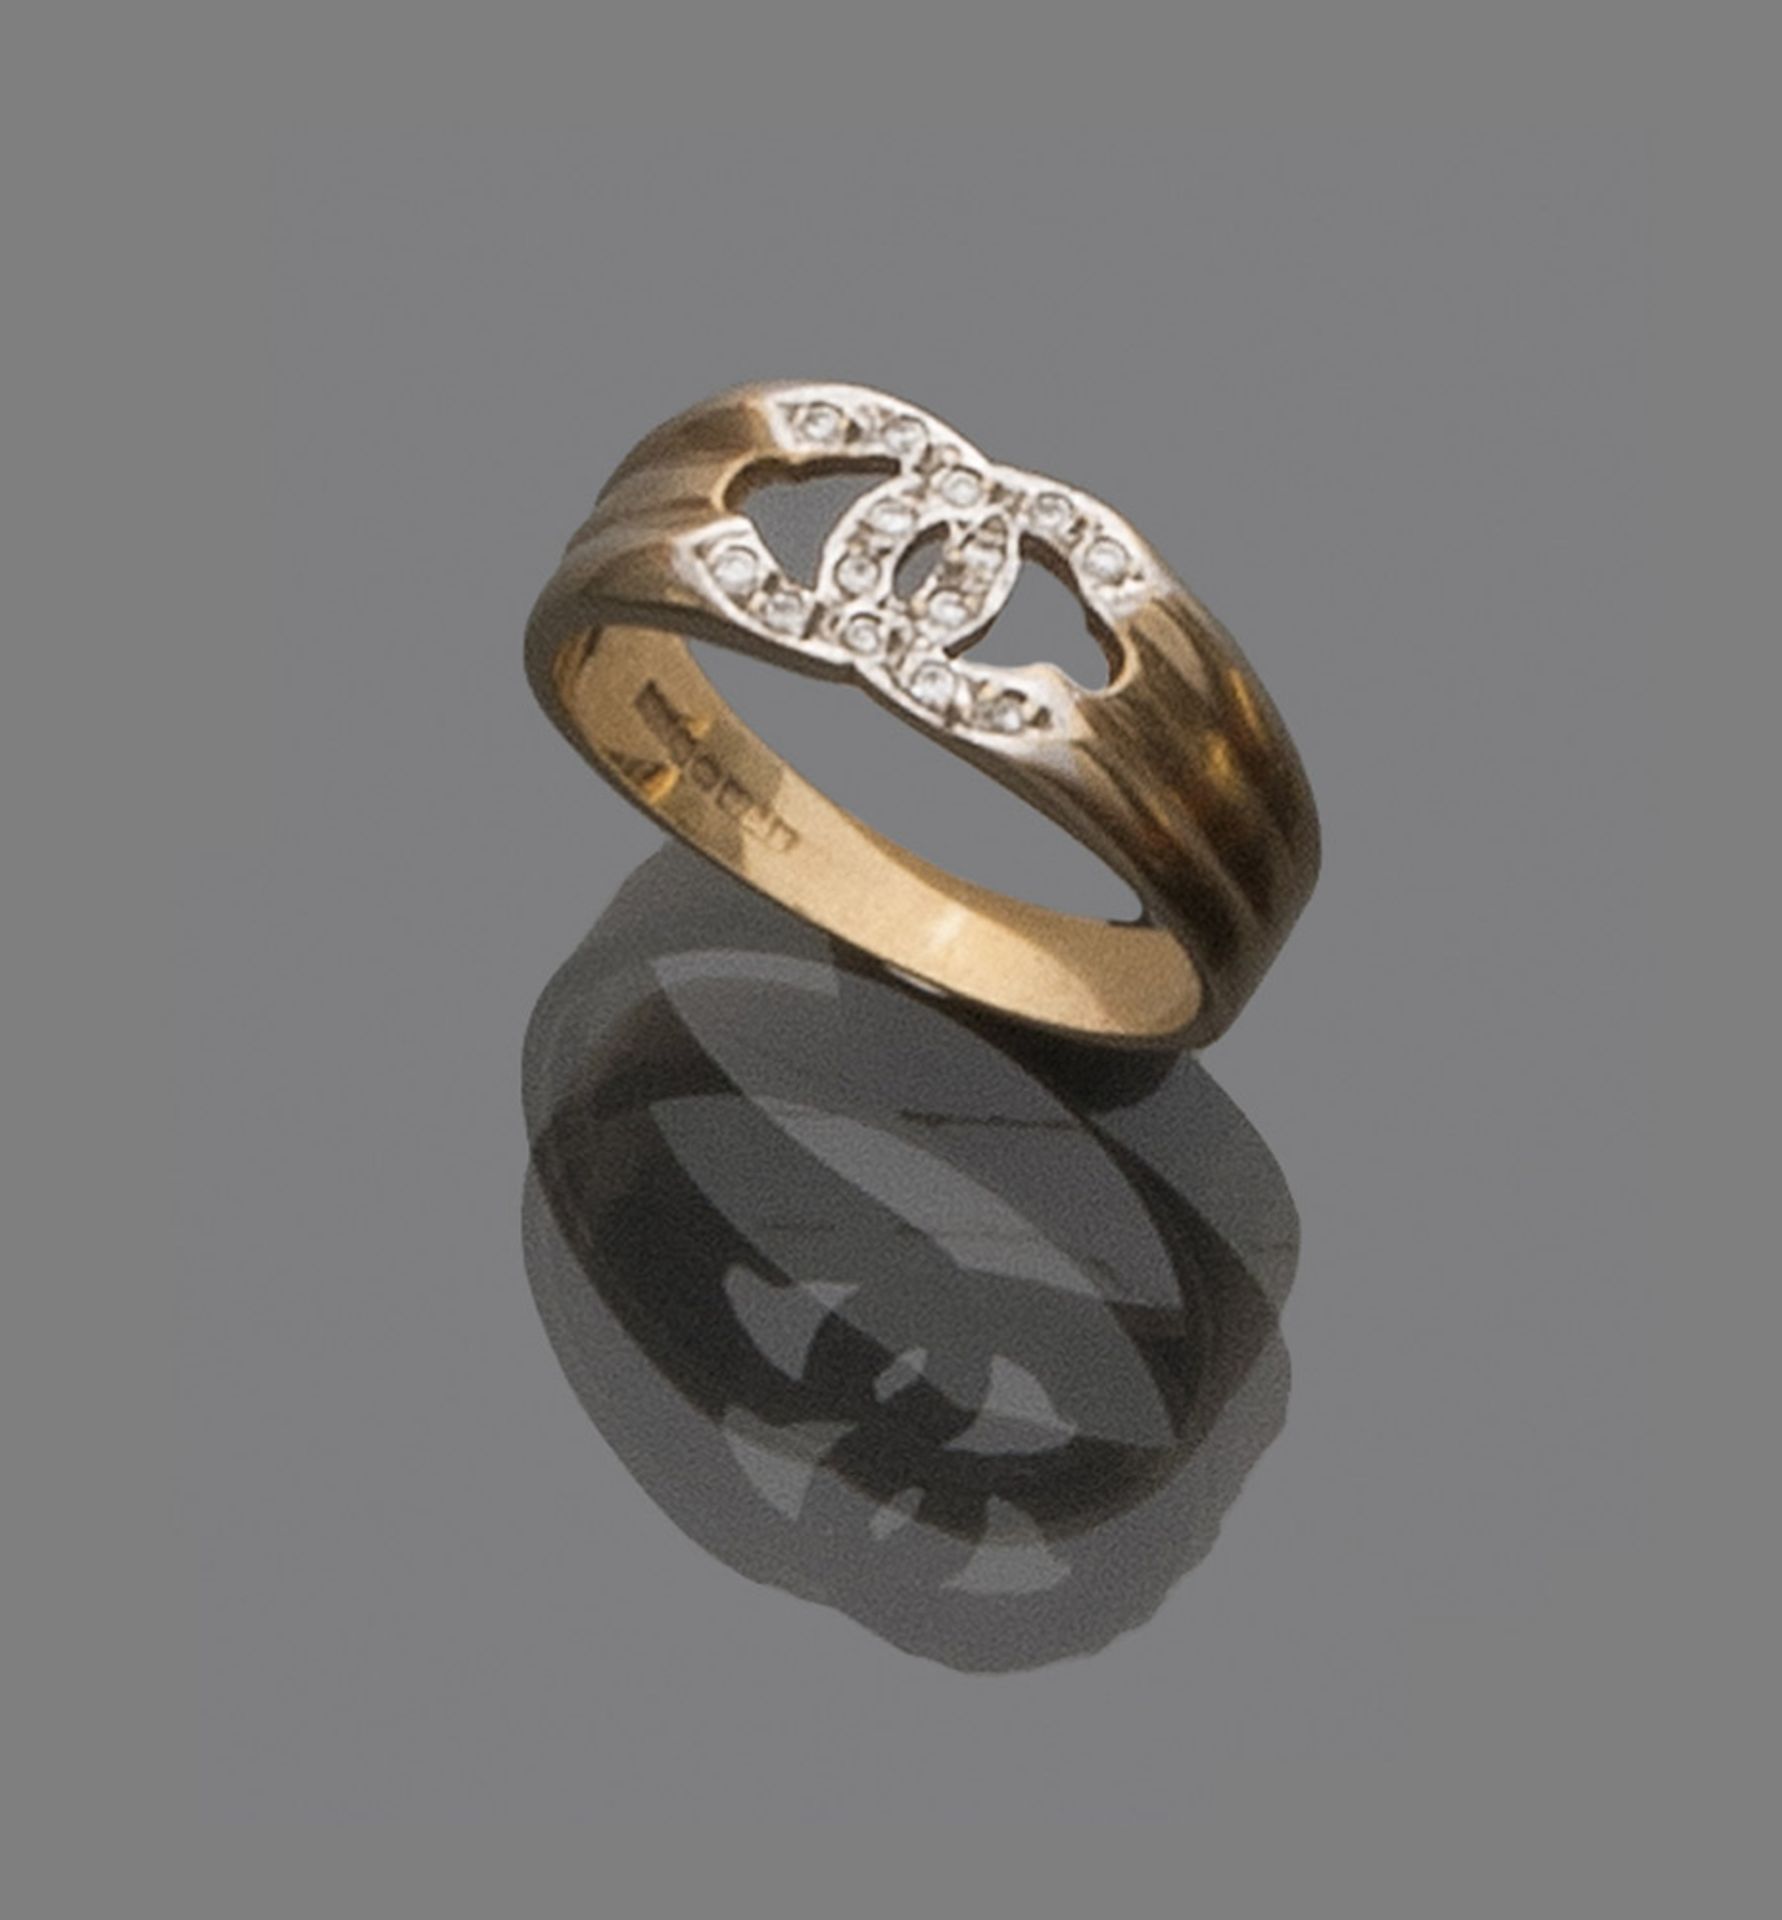 RING in yellow gold 9 kts., model Chanel, decorated with small diamonds. Total weight gr. 3,40.